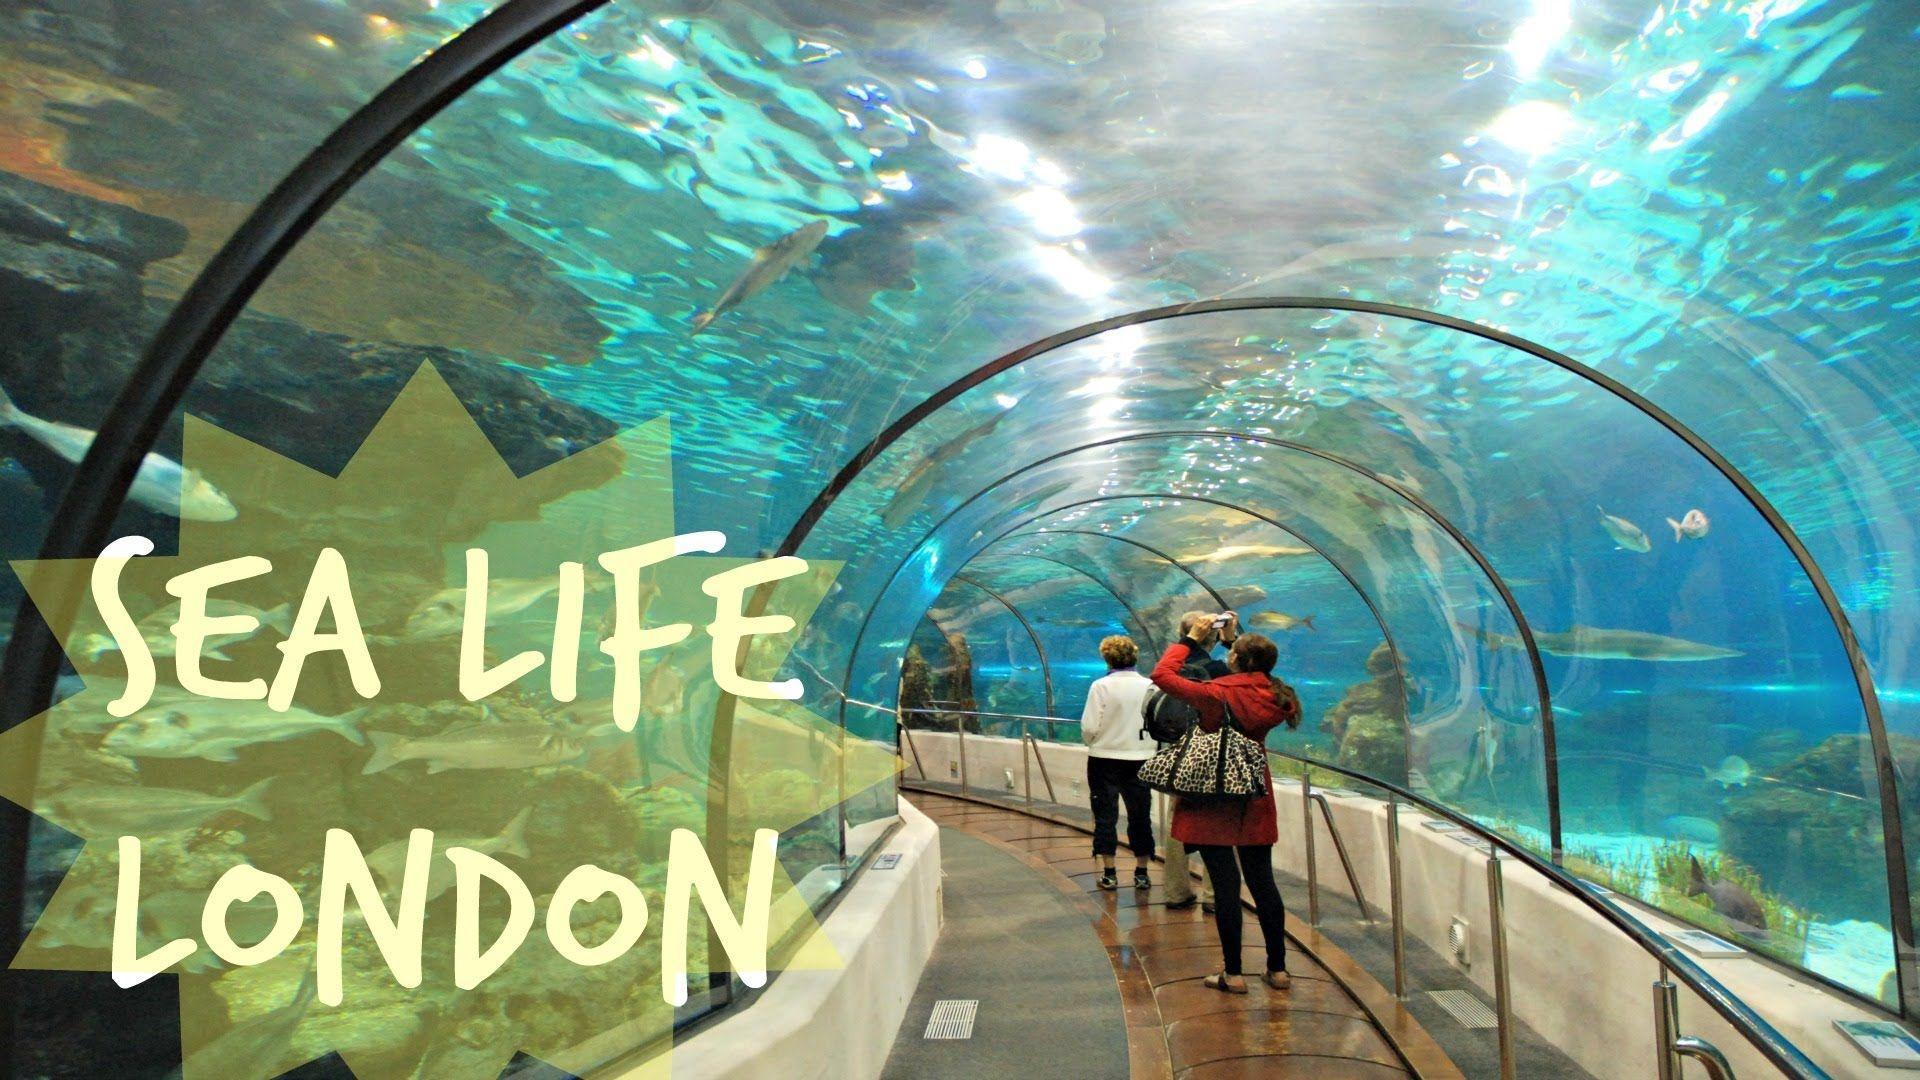 Come with me: Sea Life London